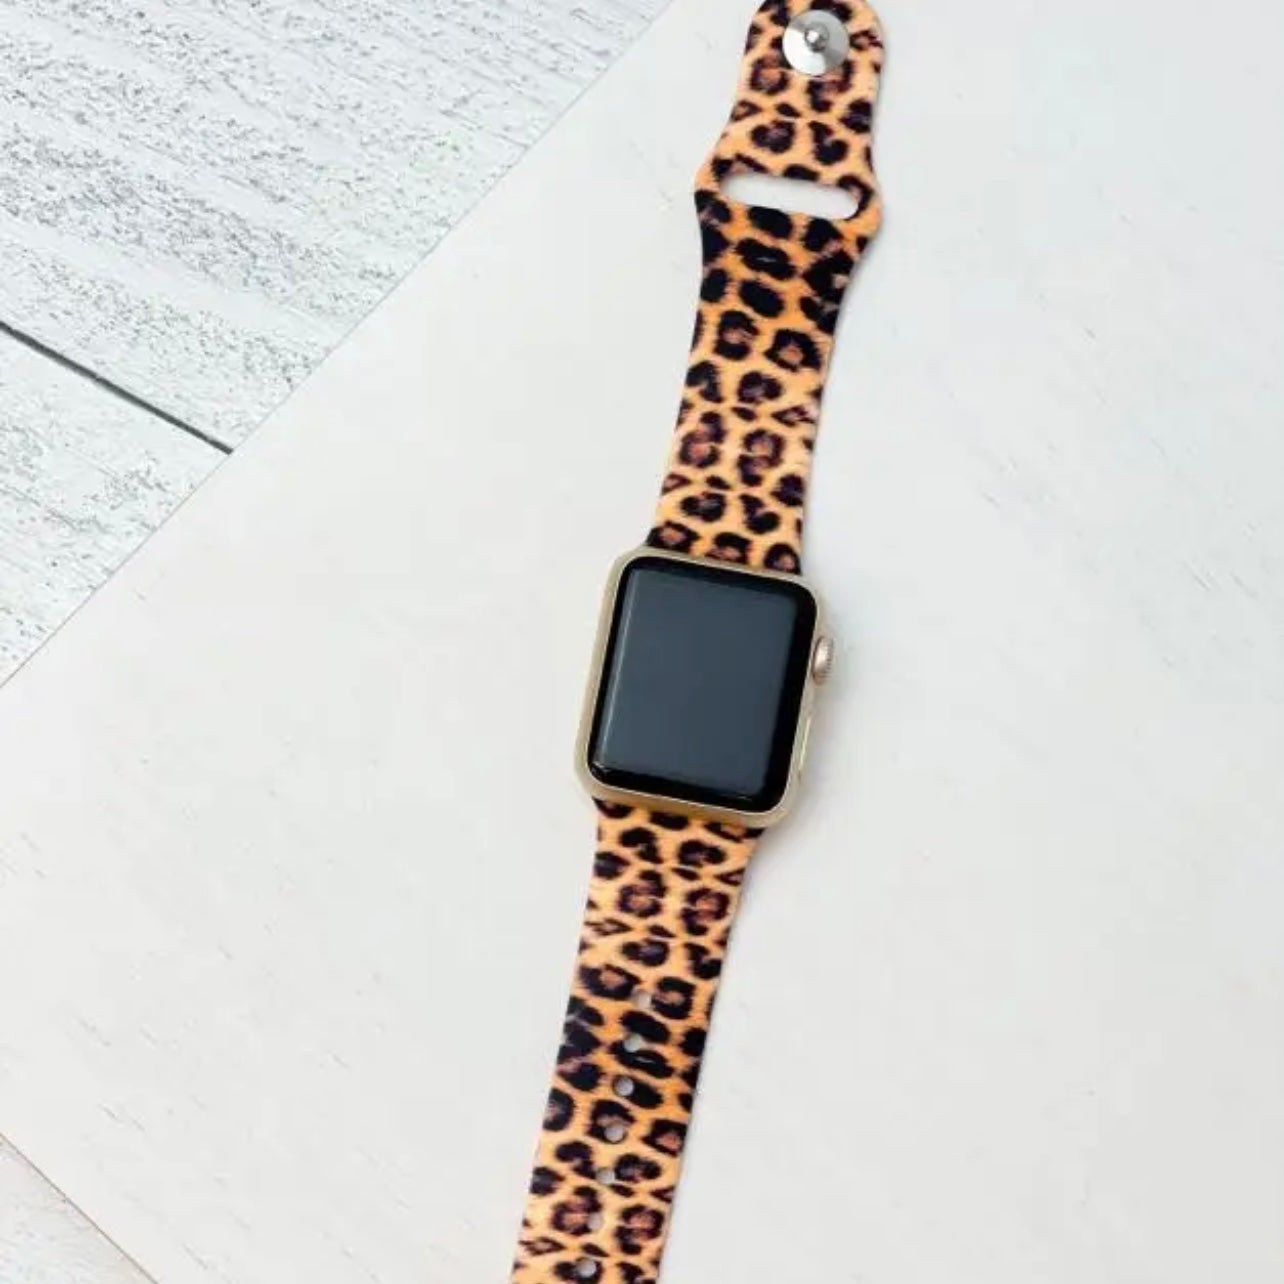 Printed Smart Watch Bands